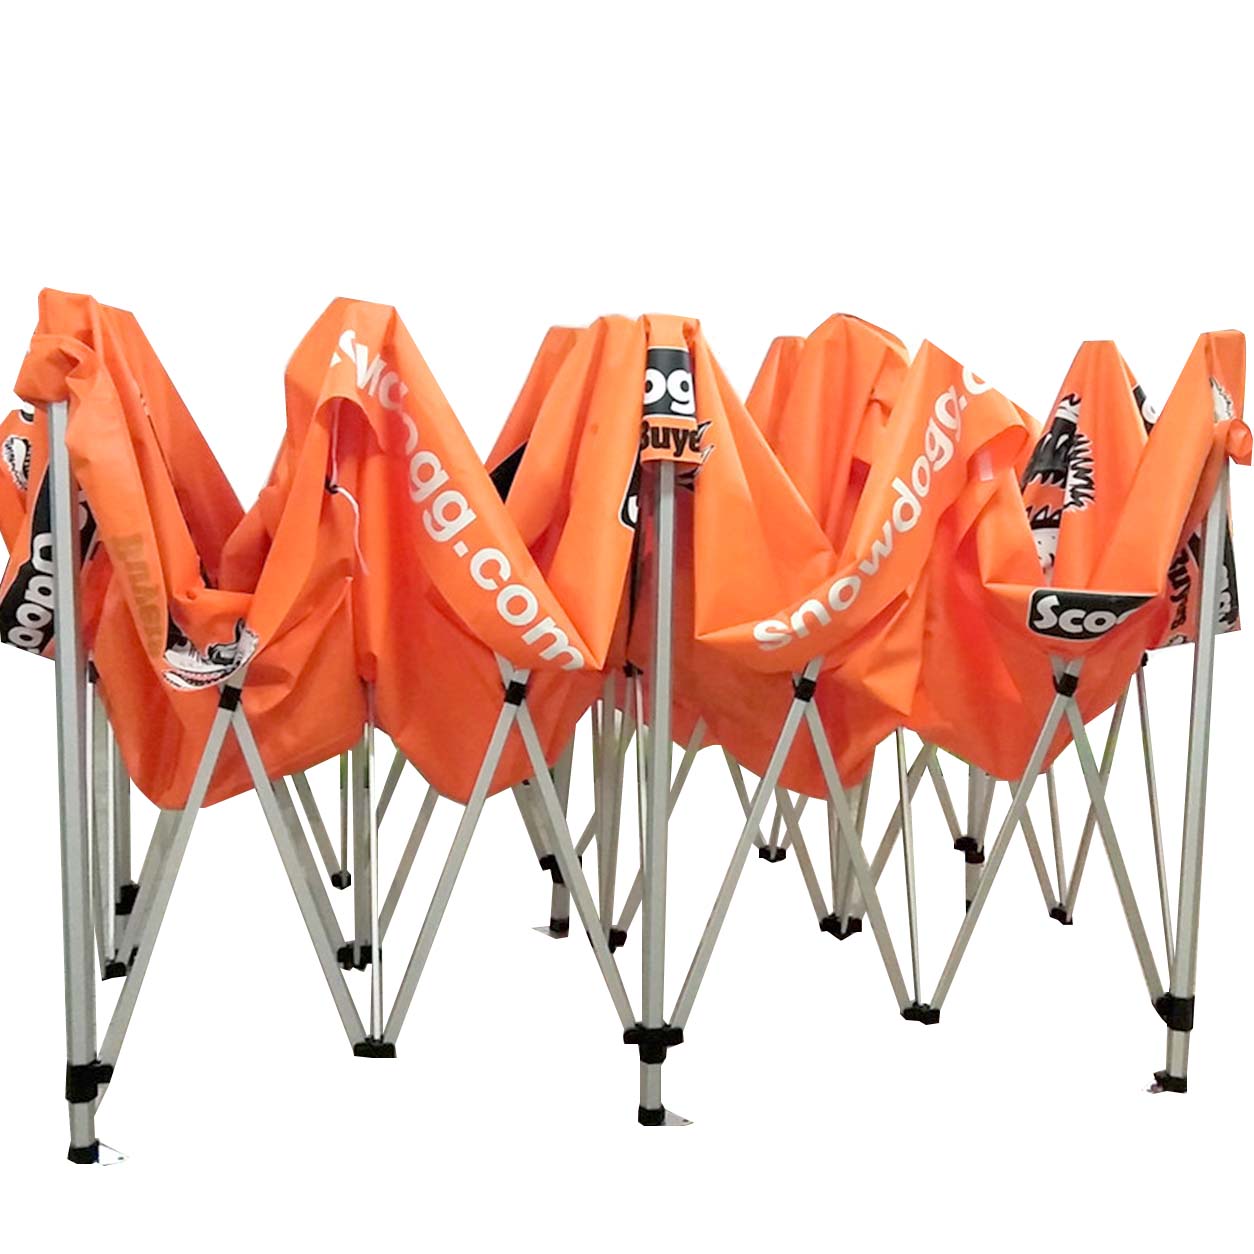 FeaMont strength portable canopy widely-use for outdoor activities-1